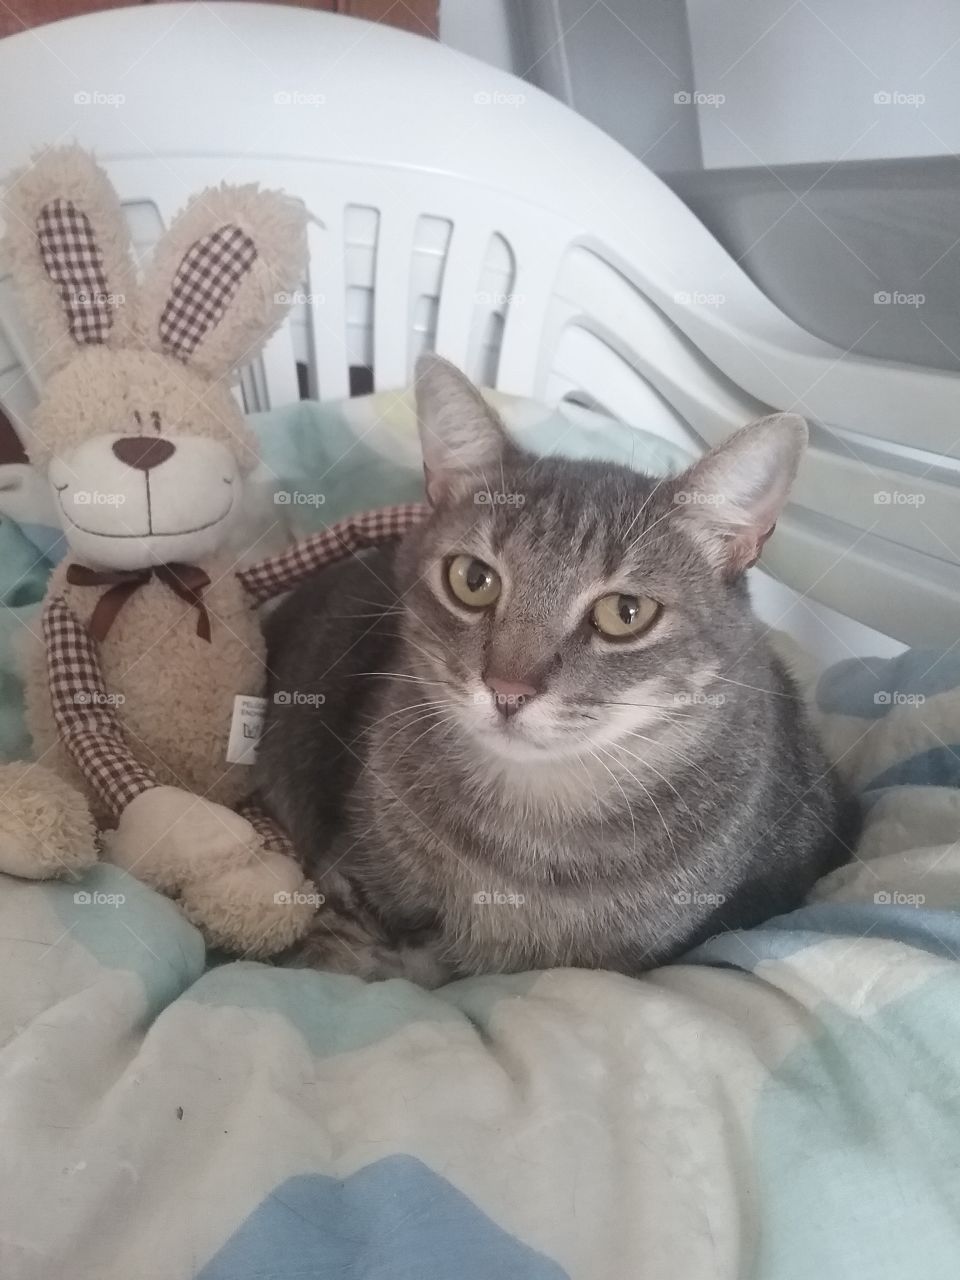 Grey cat and its bunny friend